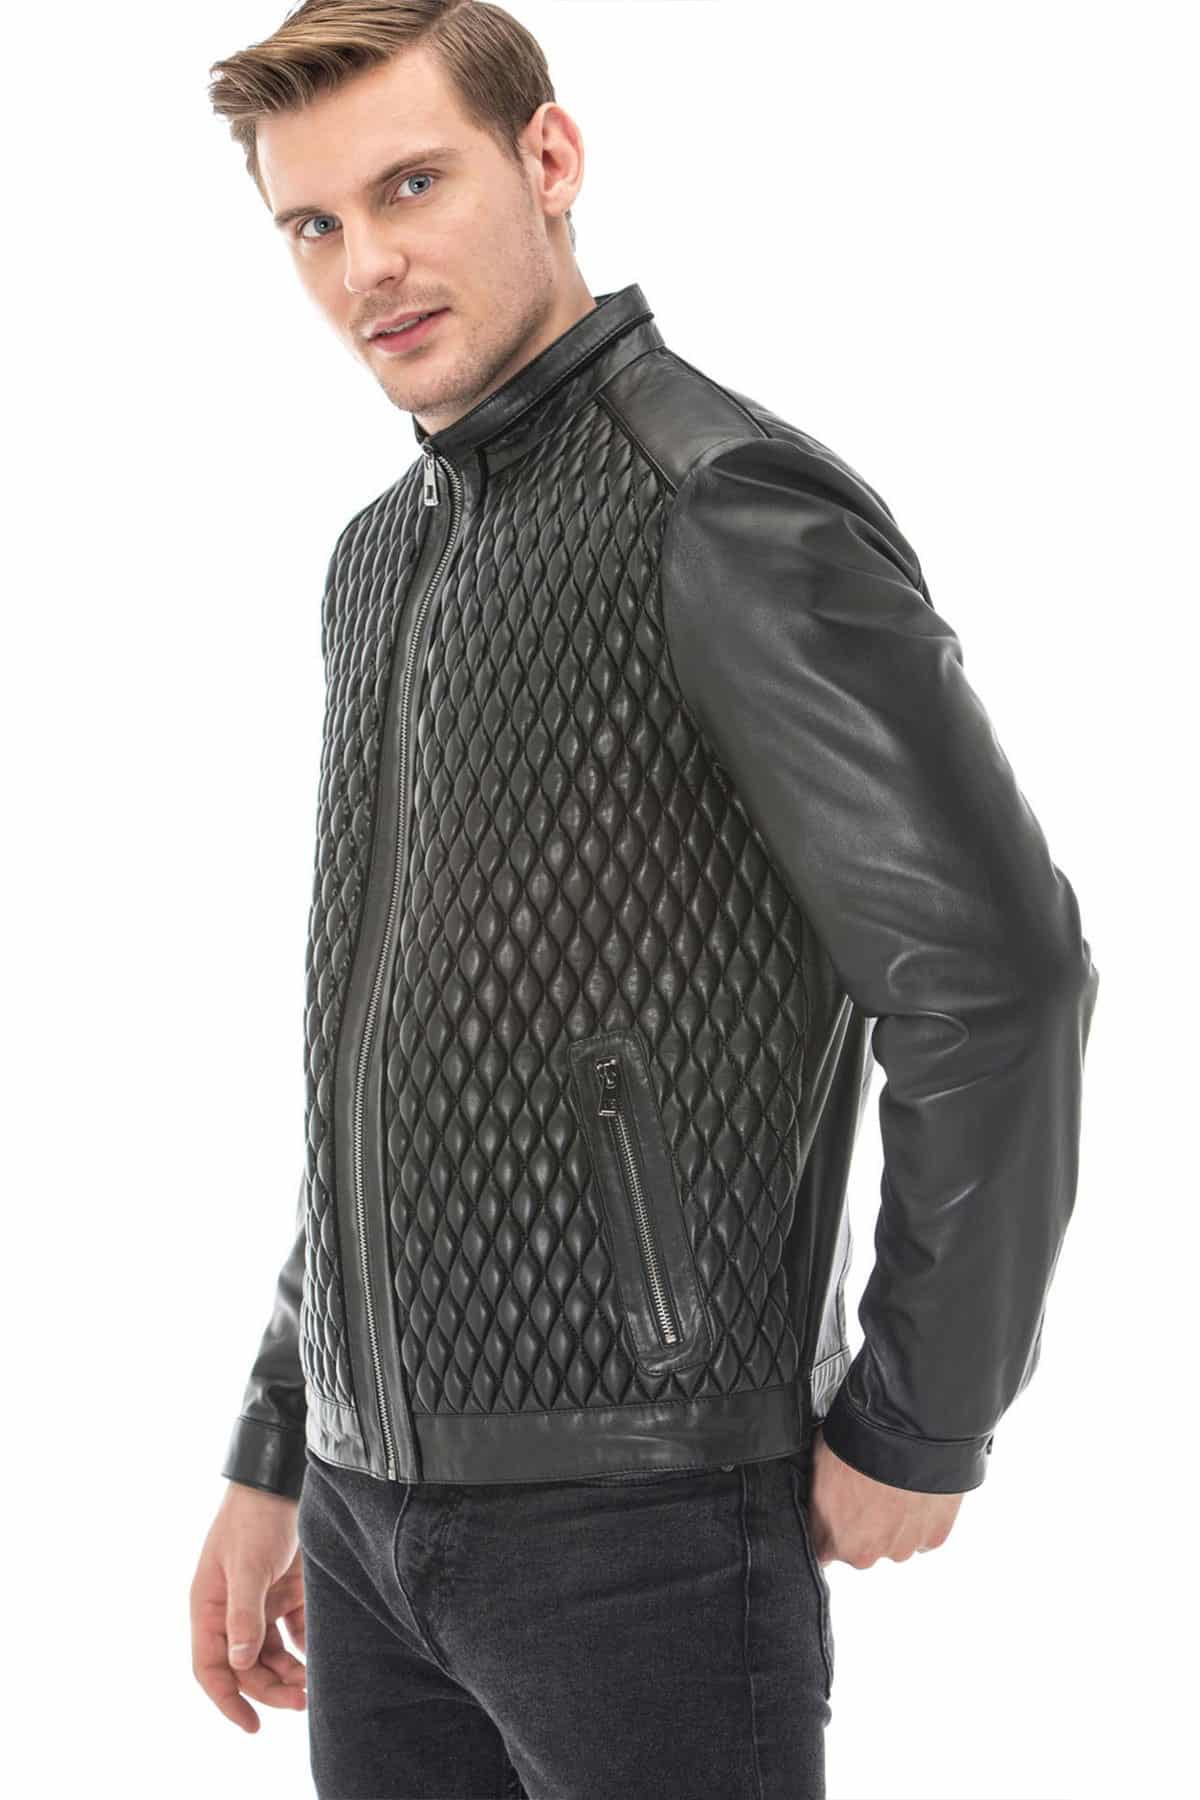 Buy Now This Mens Black Diamond Quilted Leather Bomber Jacket